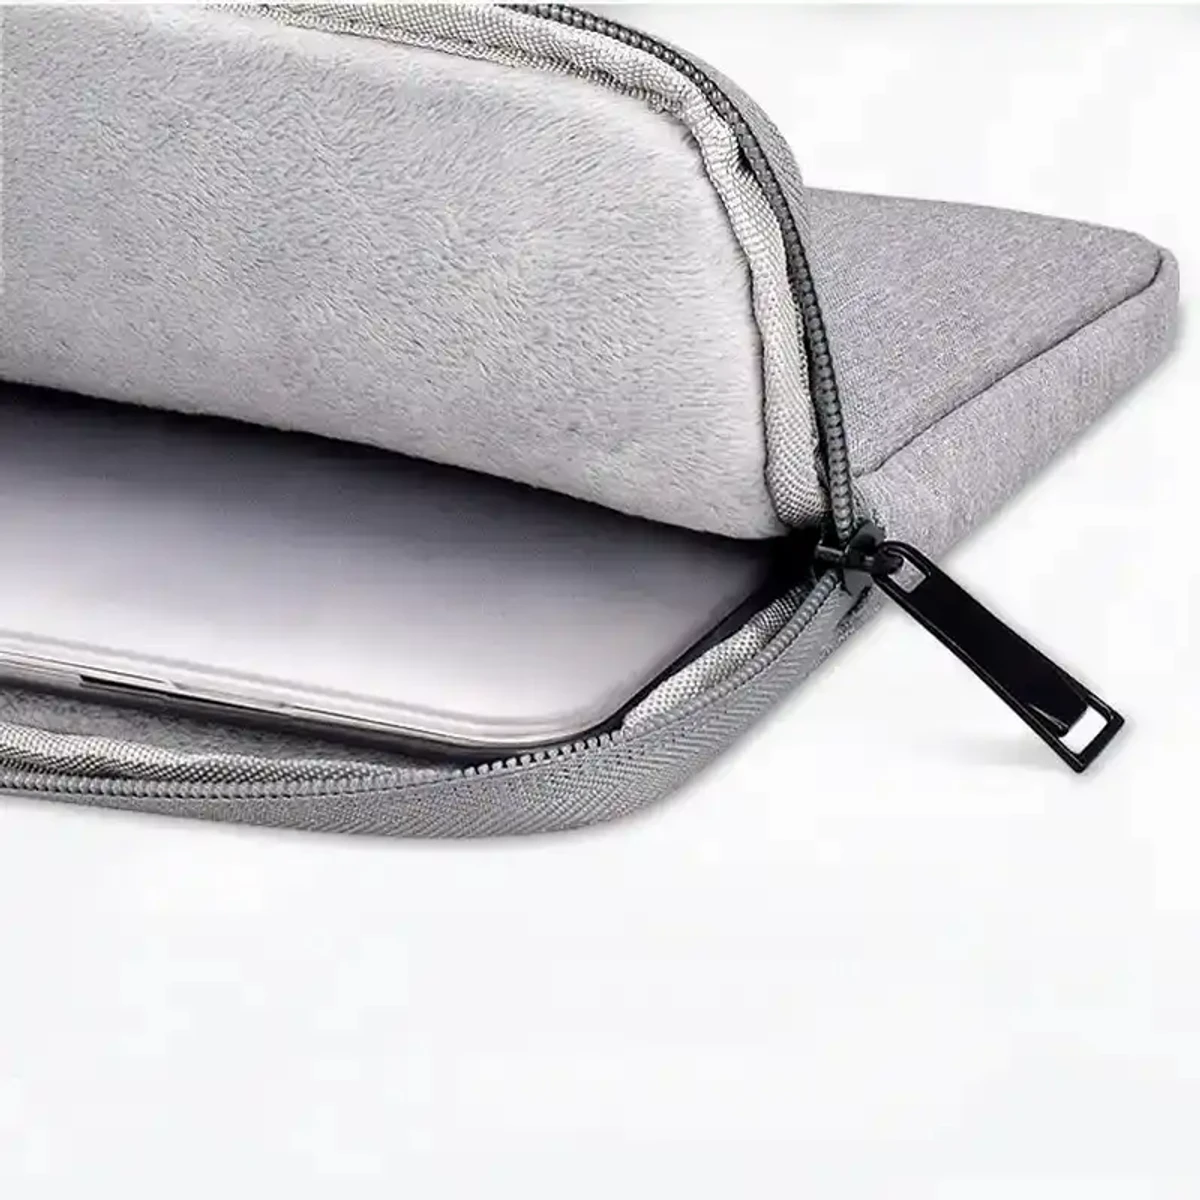 Sleeve case for laptop up to 15'4 inches bag